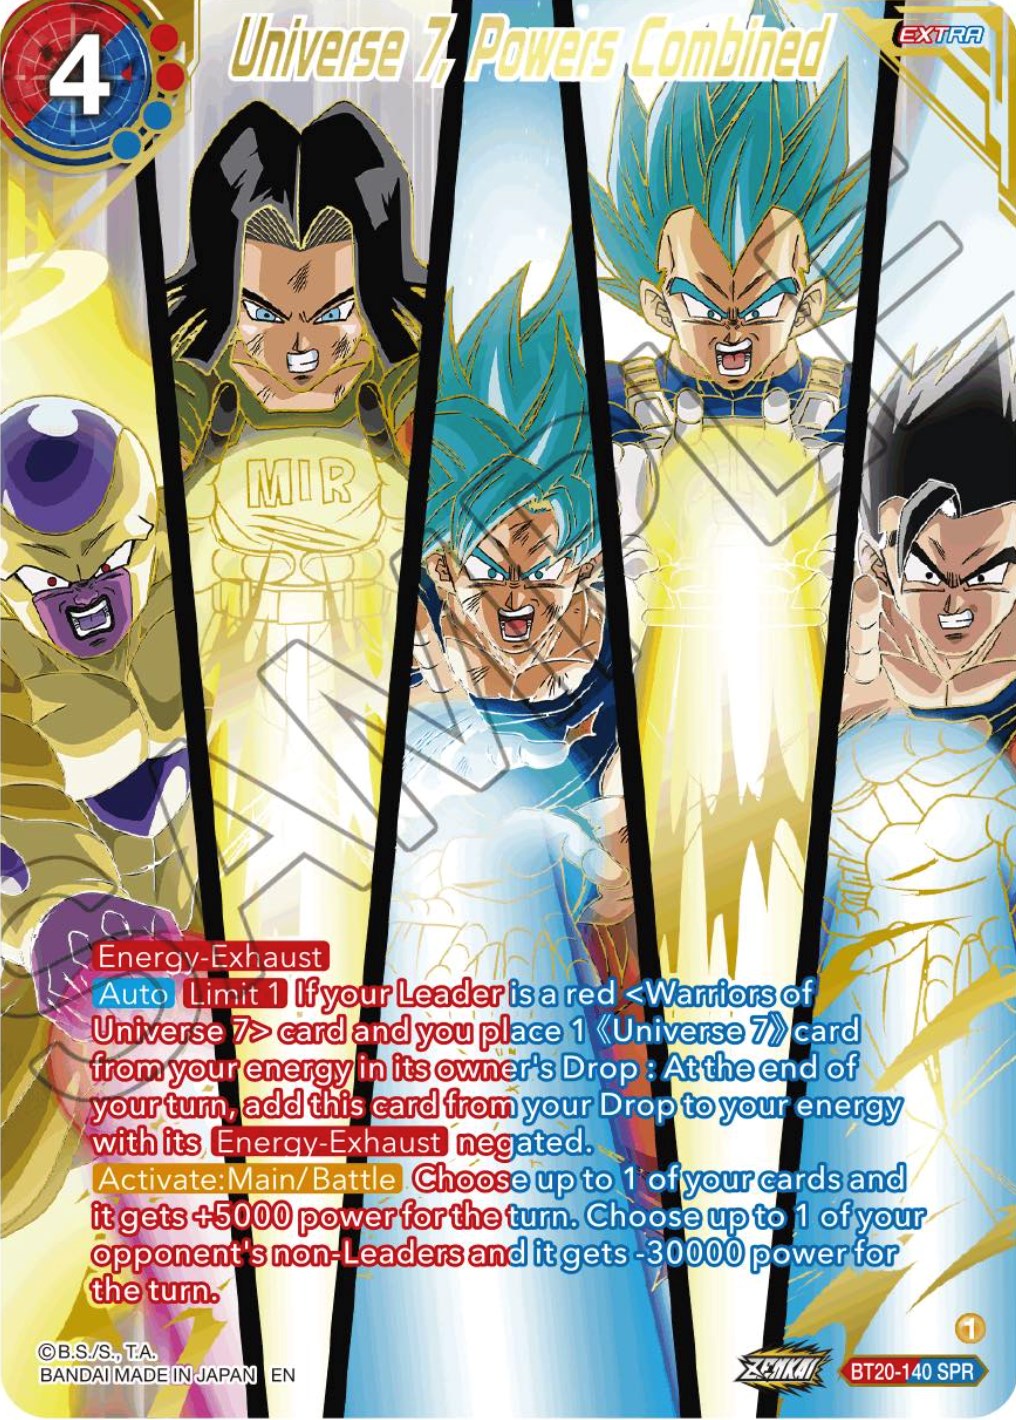 Universe 7, Powers Combined (SPR) (BT20-140) [Power Absorbed] | North Valley Games